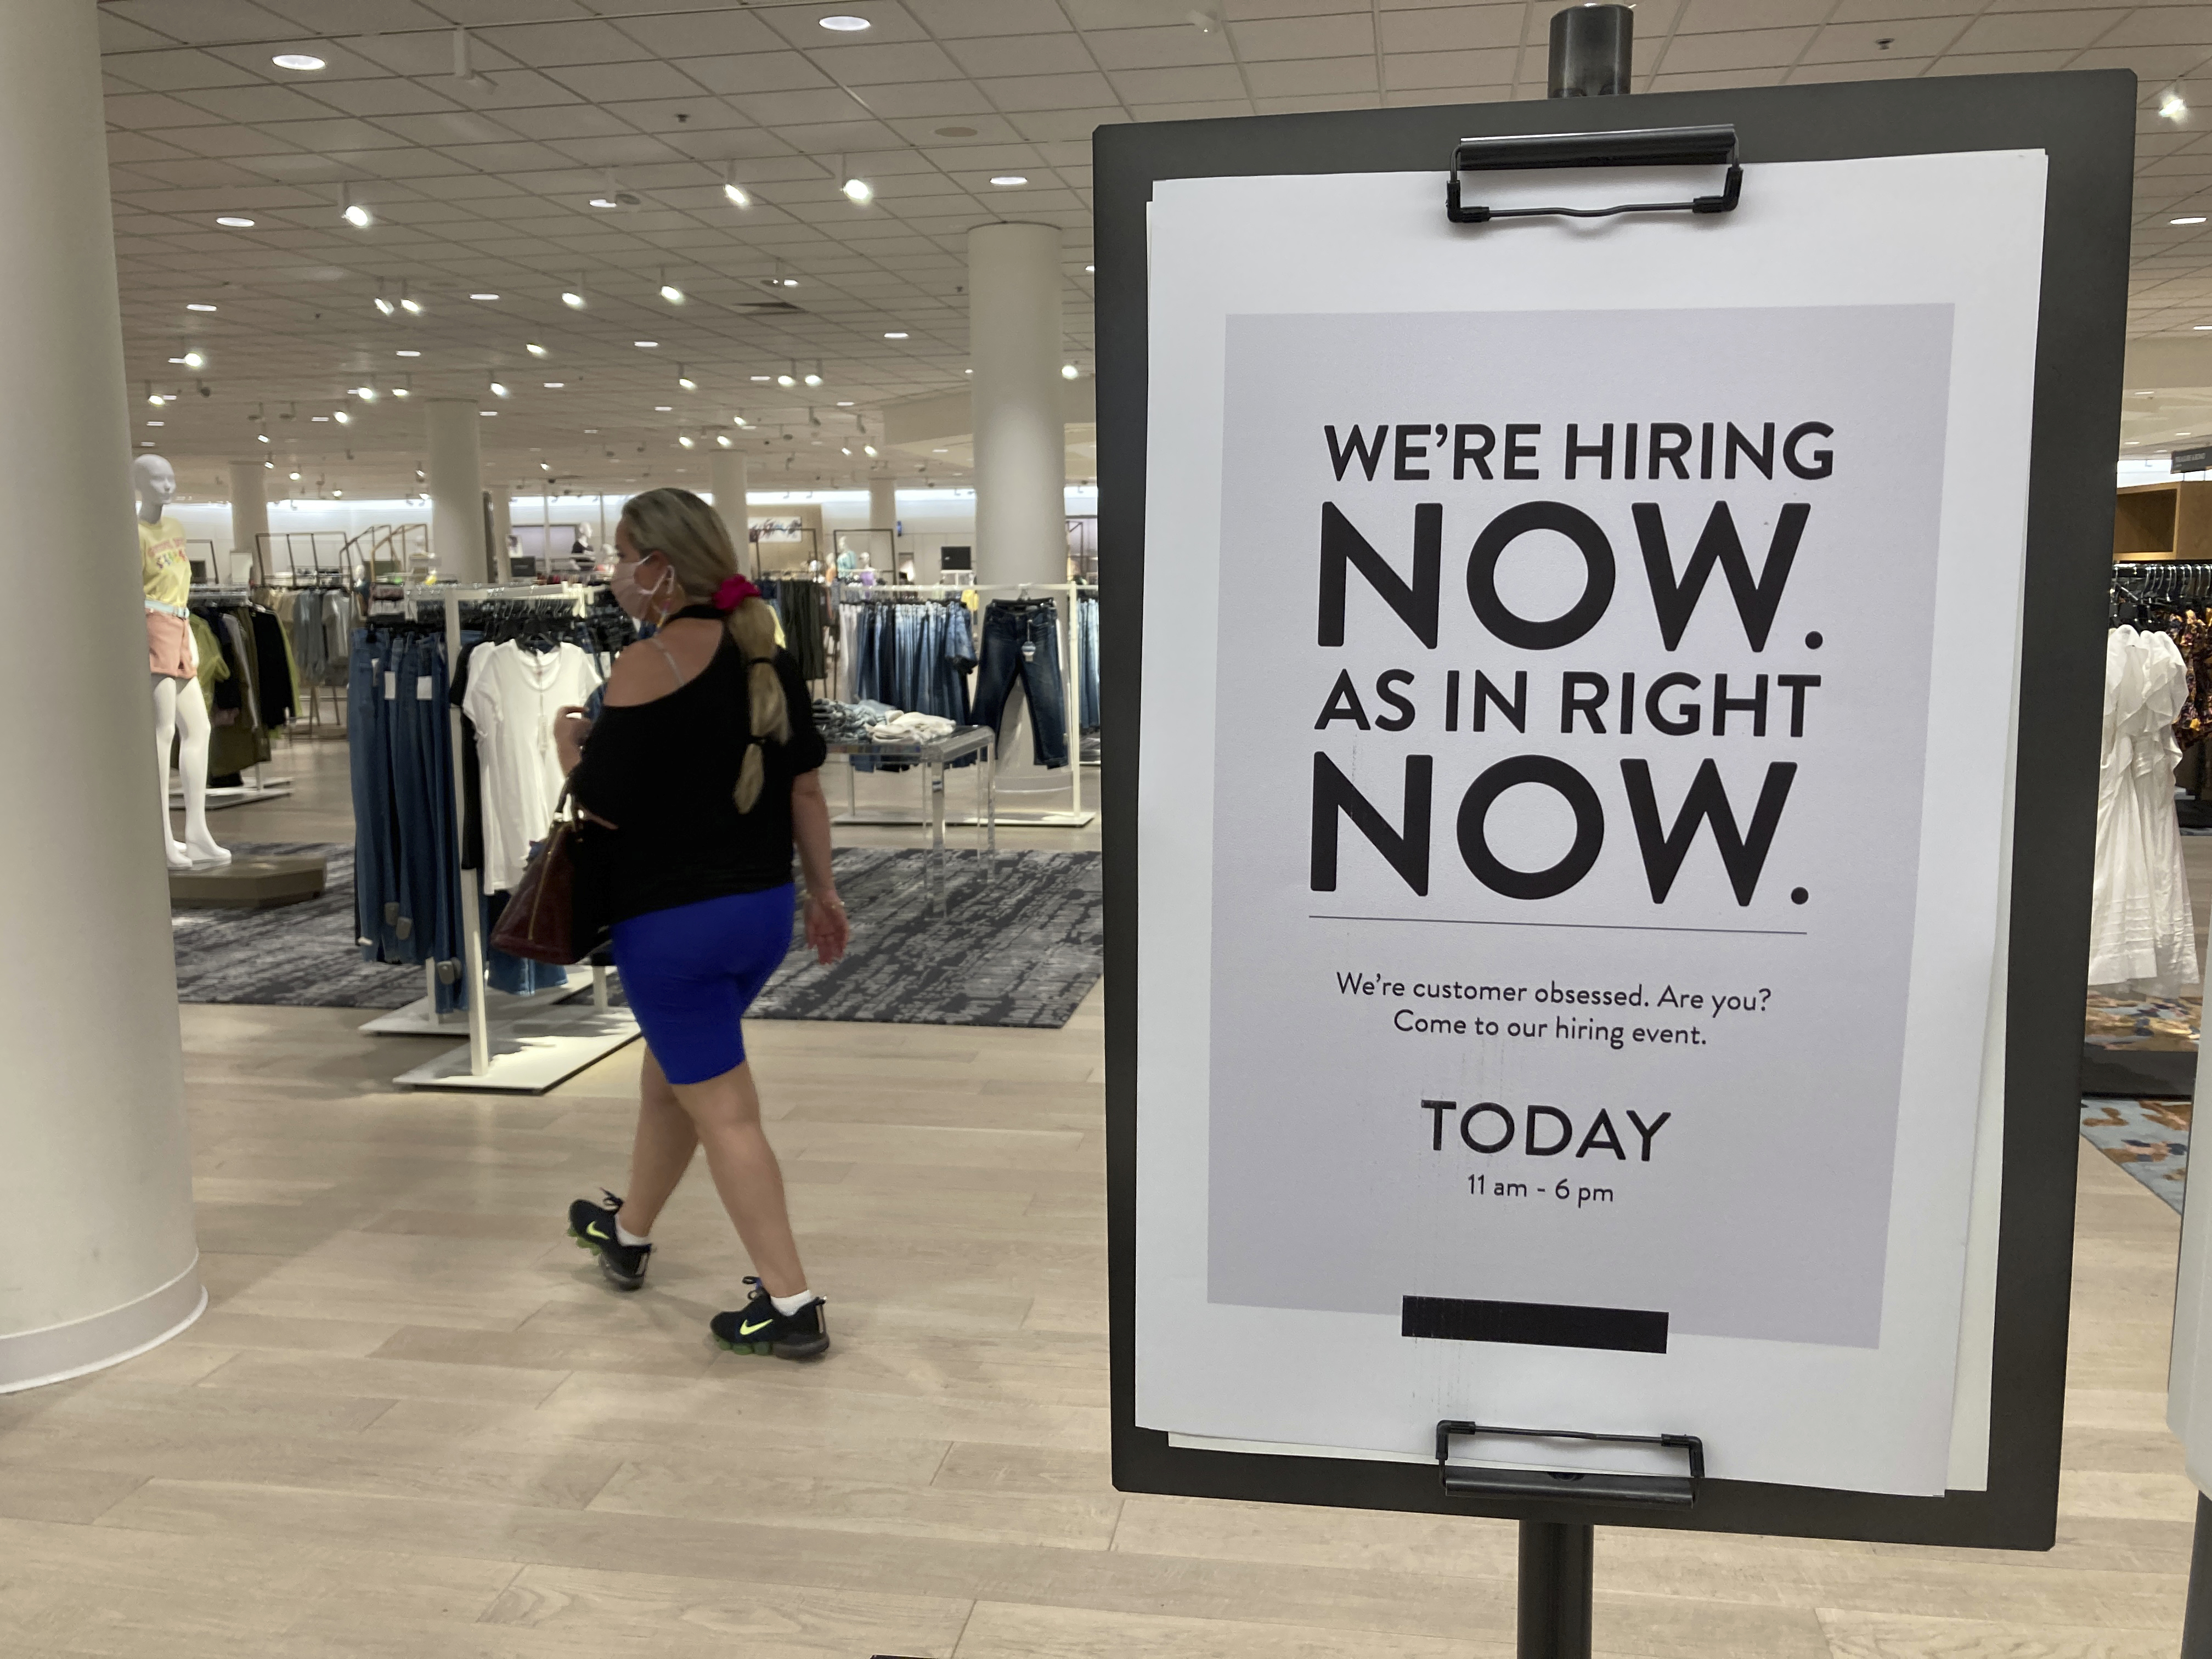 Customer Service Nordstrom Salary in Texas (Hourly)